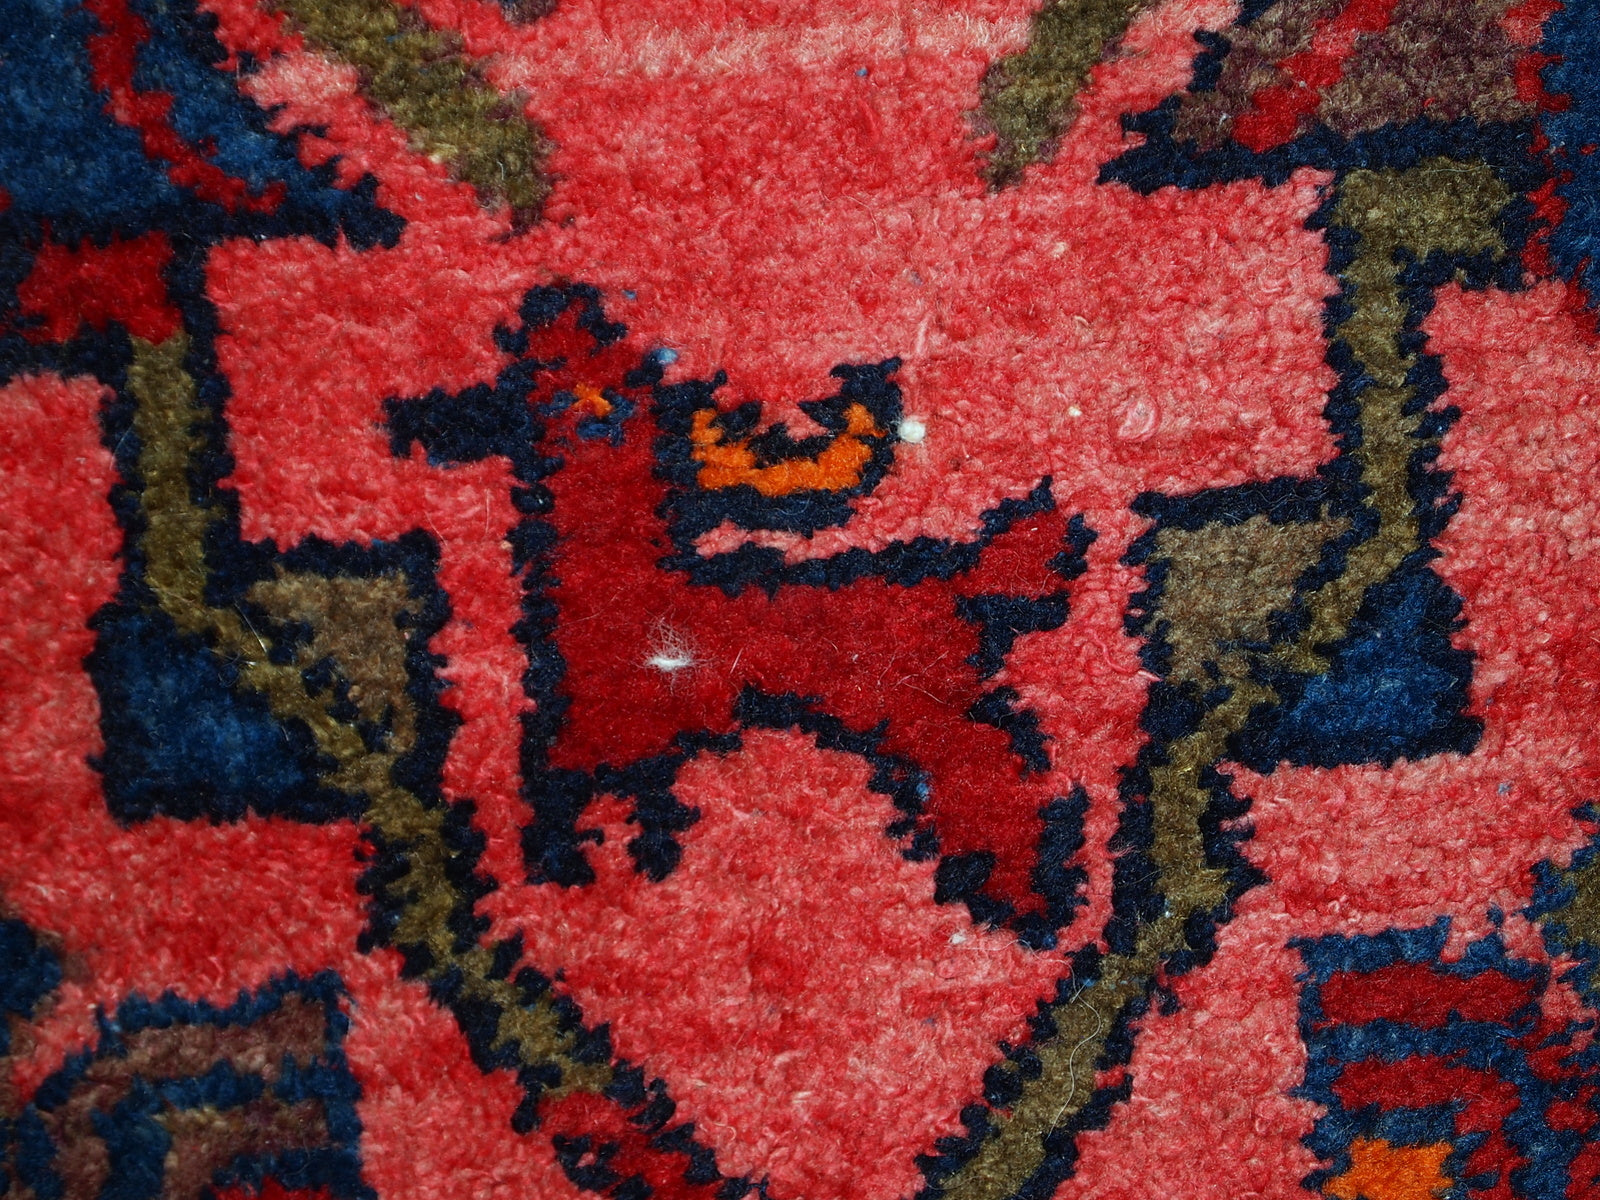 Hand made antique Persian Malayer rug in original good condition. The main colors of this rug are variety of red shades. The details of the tribal ornaments on it are in navy blue and olive shades. 